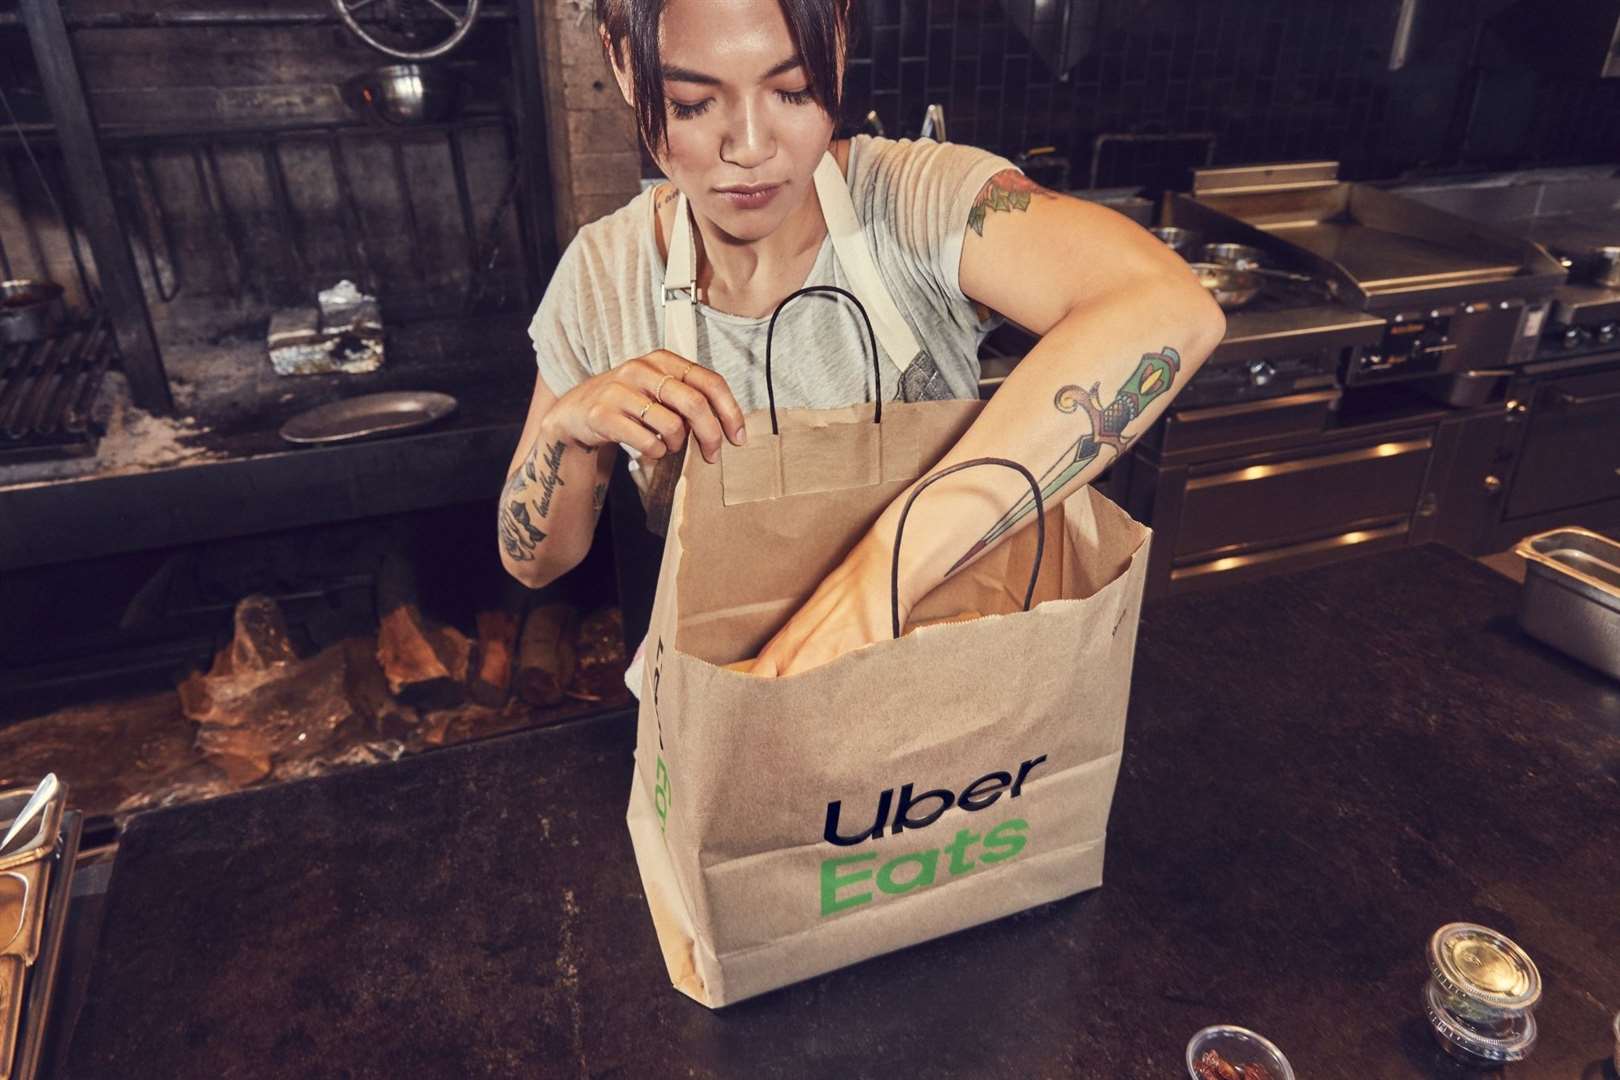 Uber Eats is one of the big three fast food apps